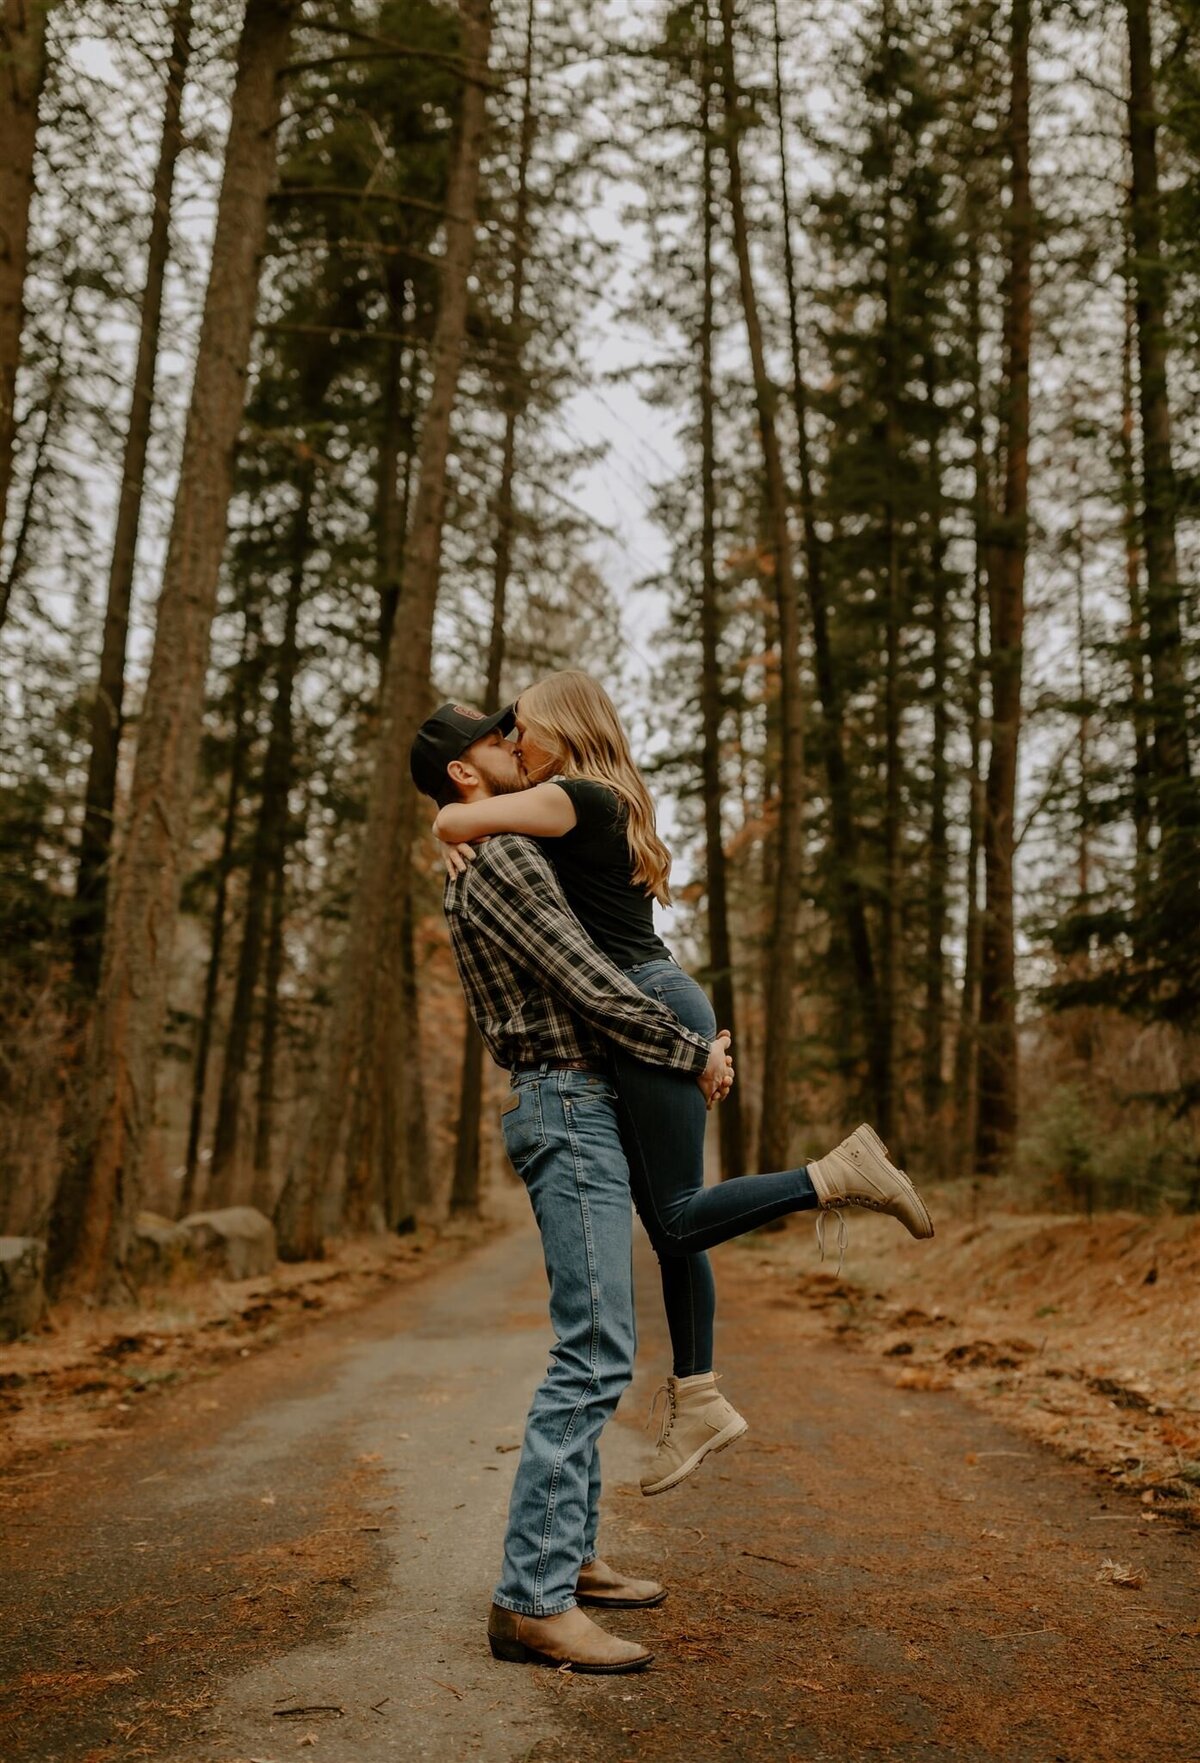 Anna-Nichol-photography-moscow-idaho-photographer-engagement-couples (13)